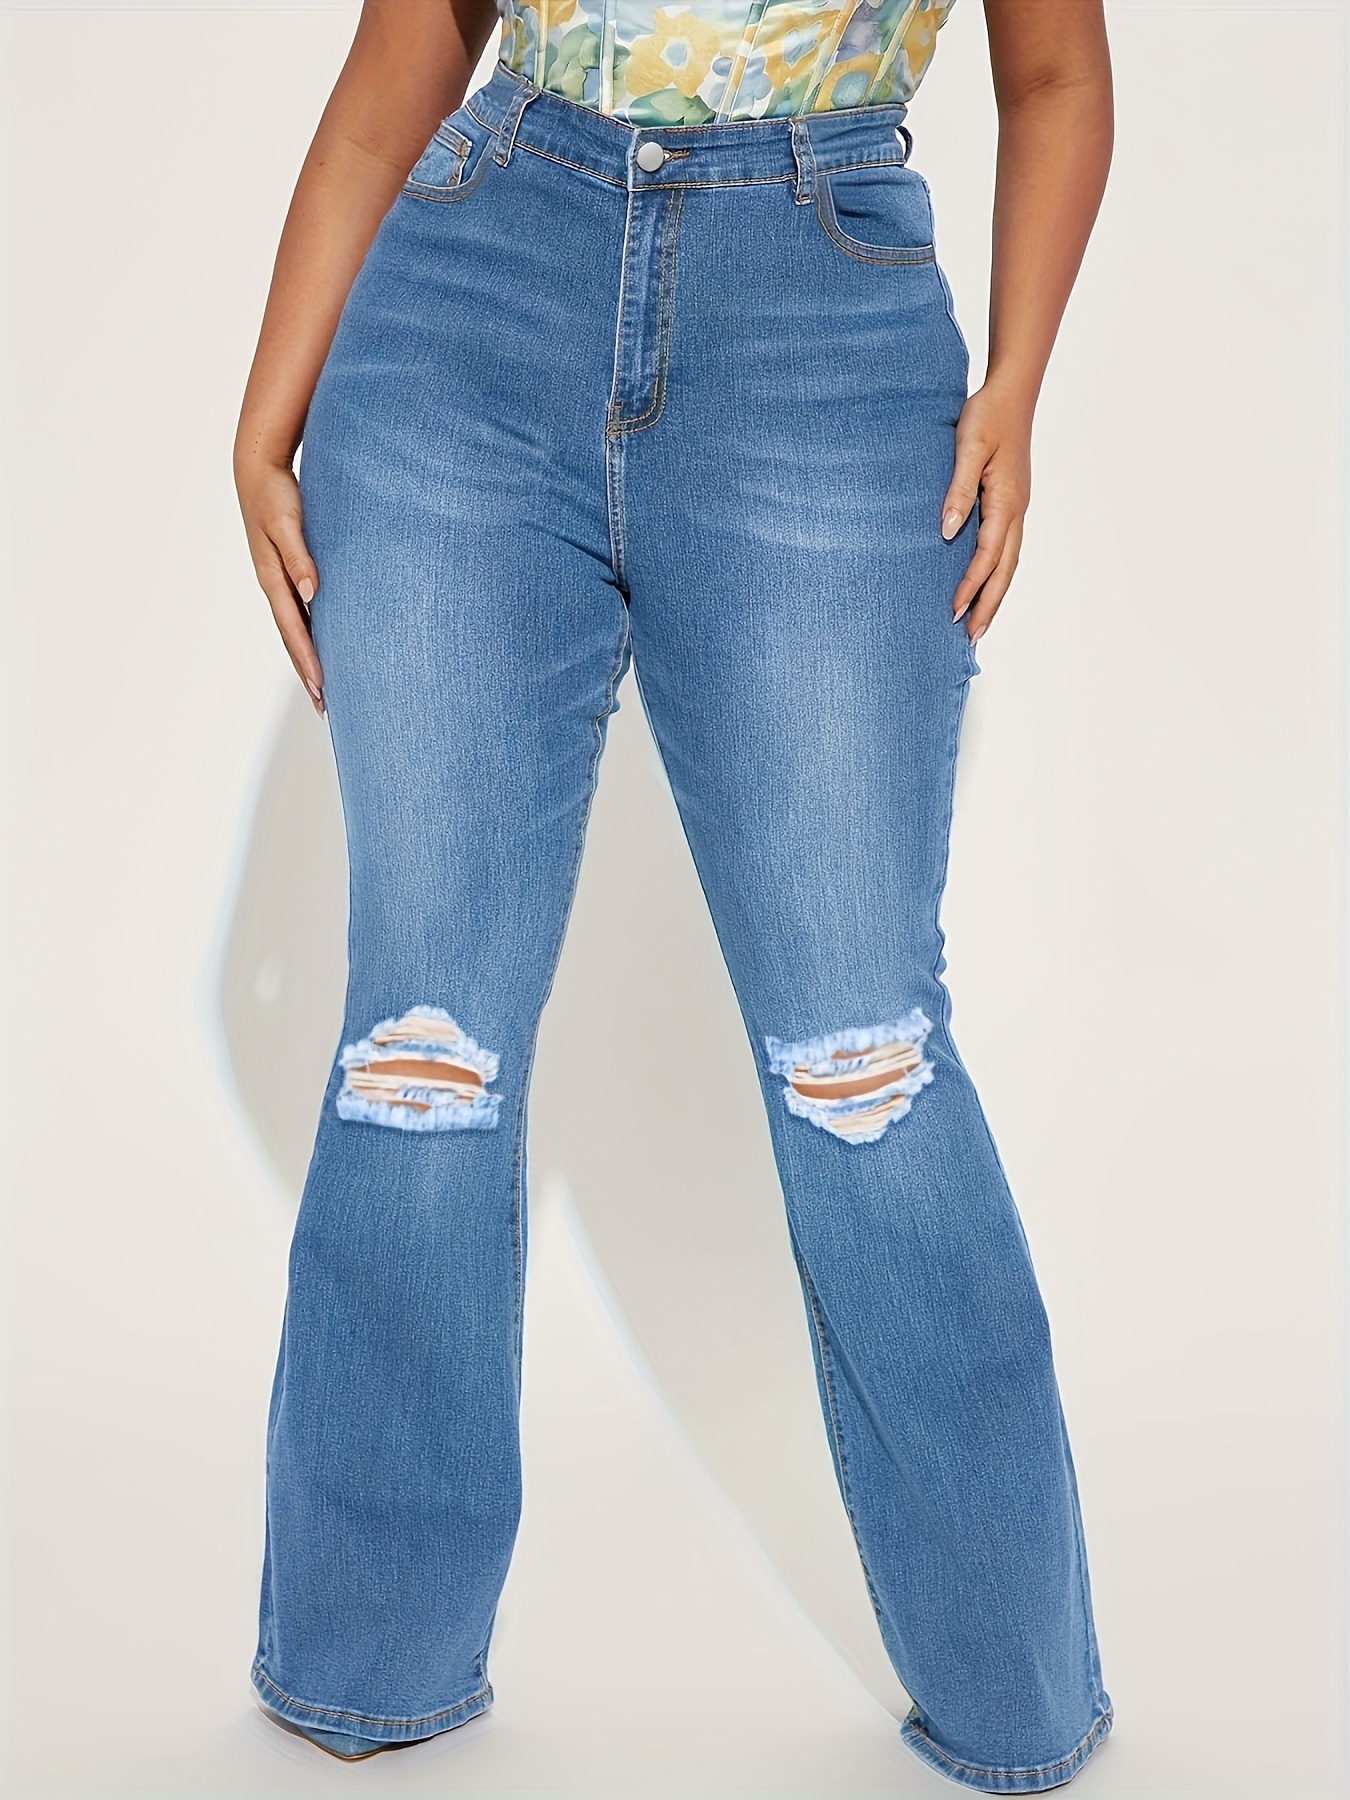 Plus Size Solid Flared Leg Jeans, Women's Plus Ripped Fringe Trim Button  Fly Flared Leg Jeans